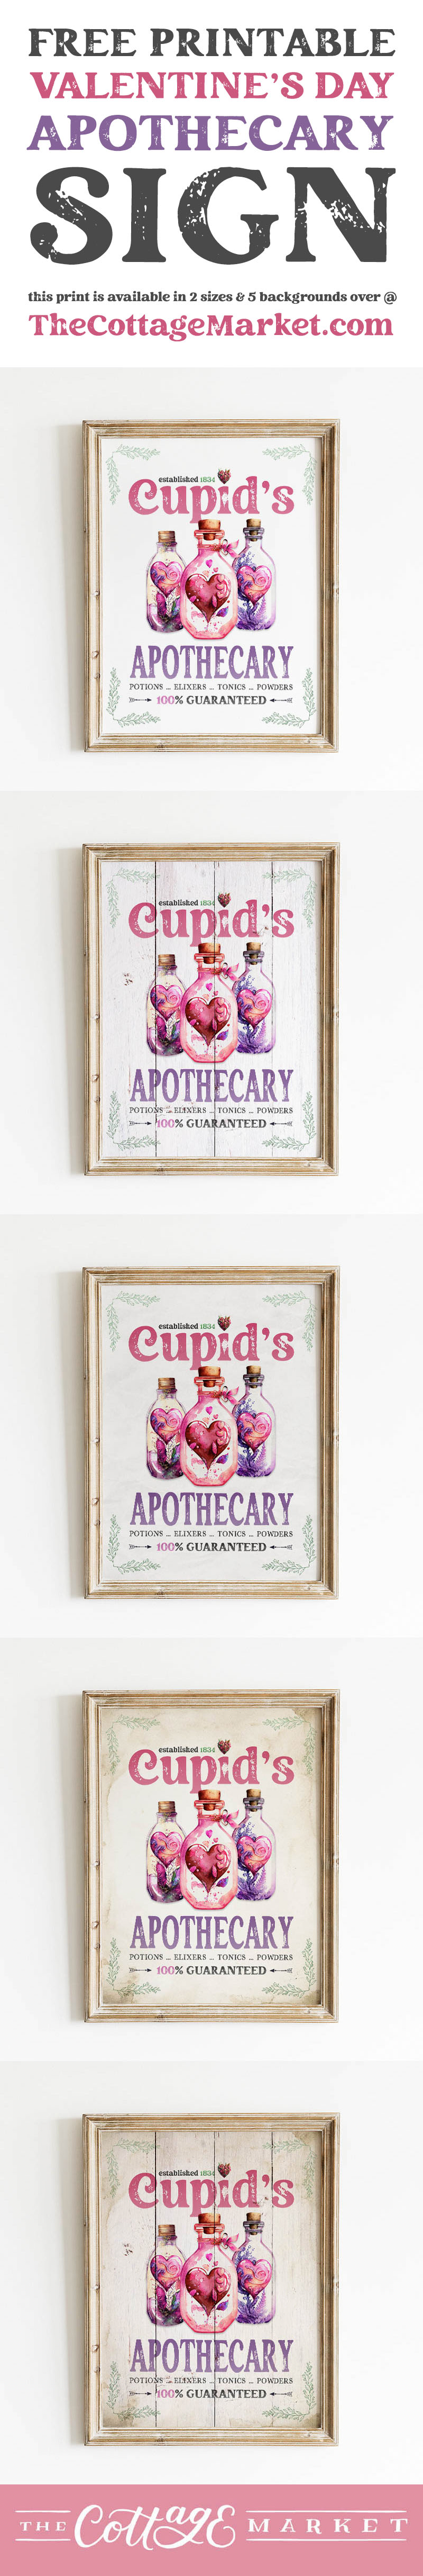 This Romantic Free Printable Valentine's Day Apothecary Sign will add tons of charm and romance to your space!